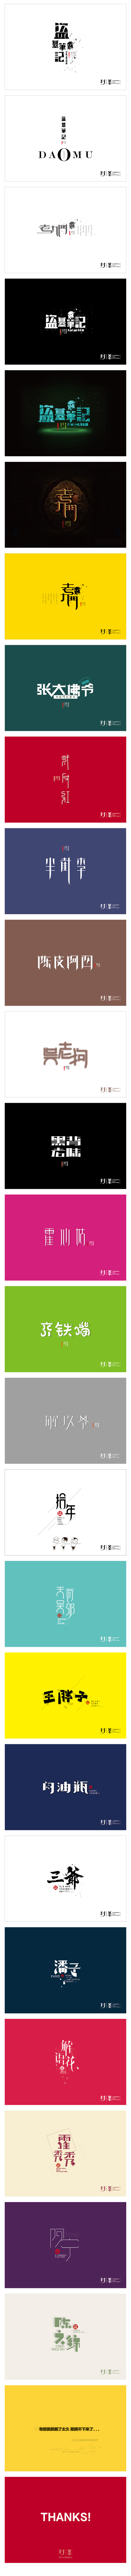 170+ You'll really enjoy Chinese font design case